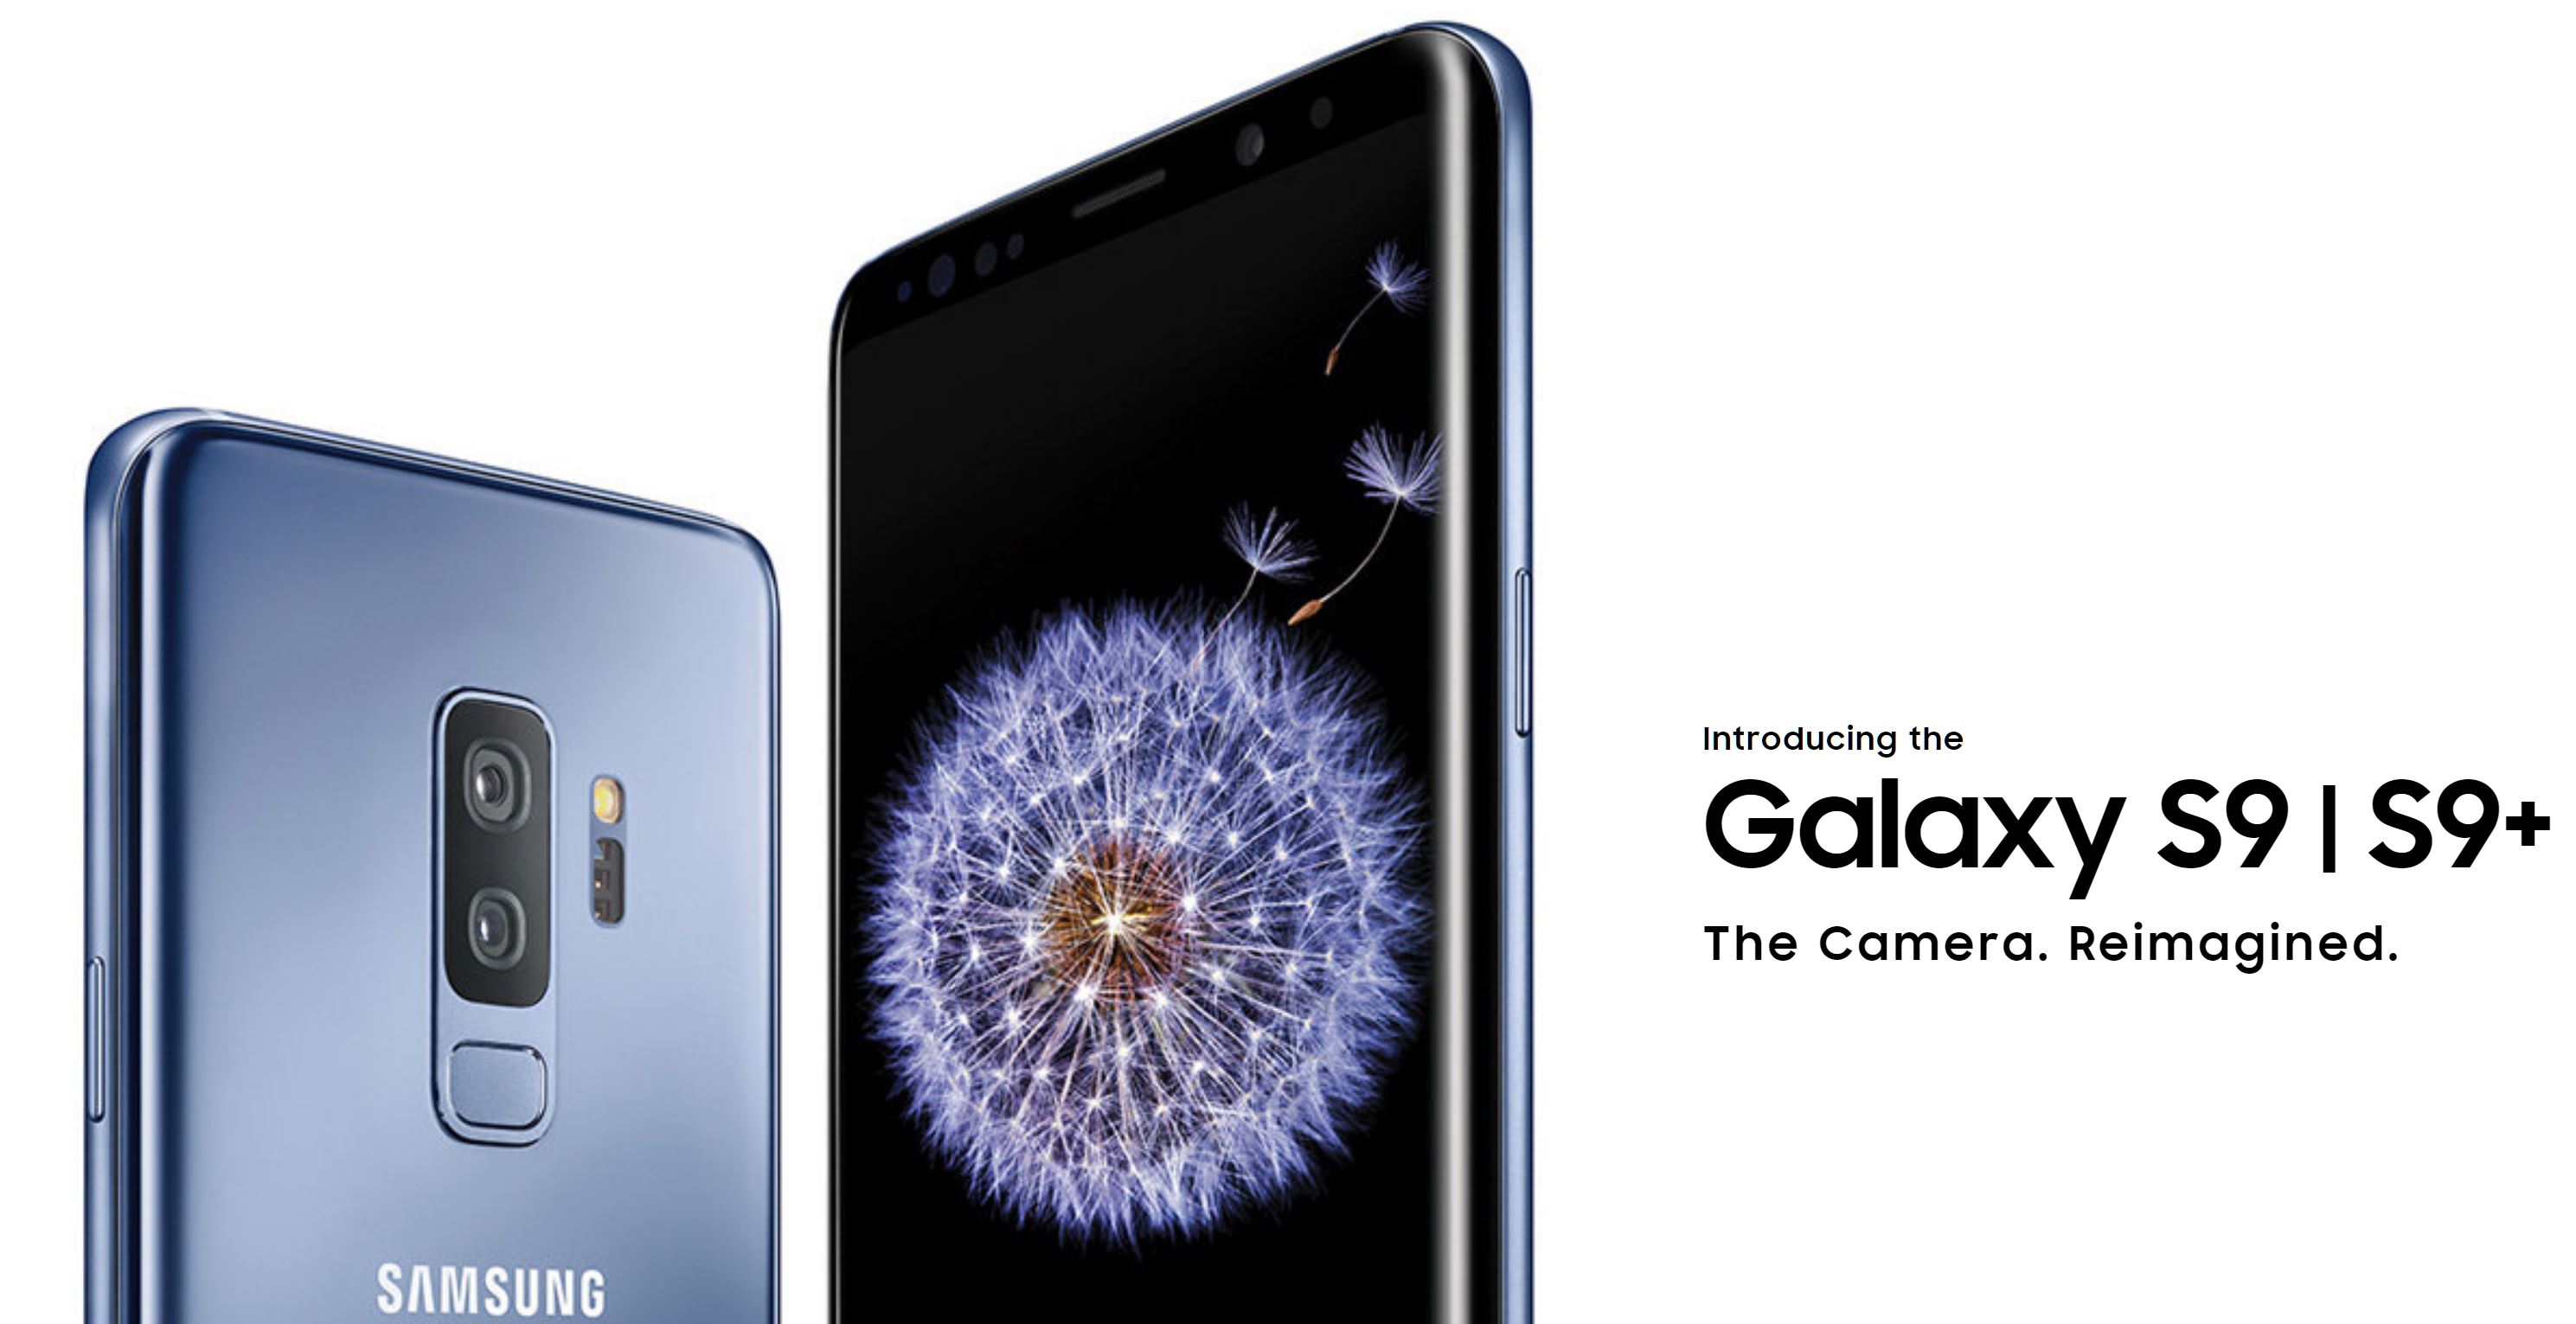 Samsung Galaxy S9 & Galaxy S9+ Launched in India